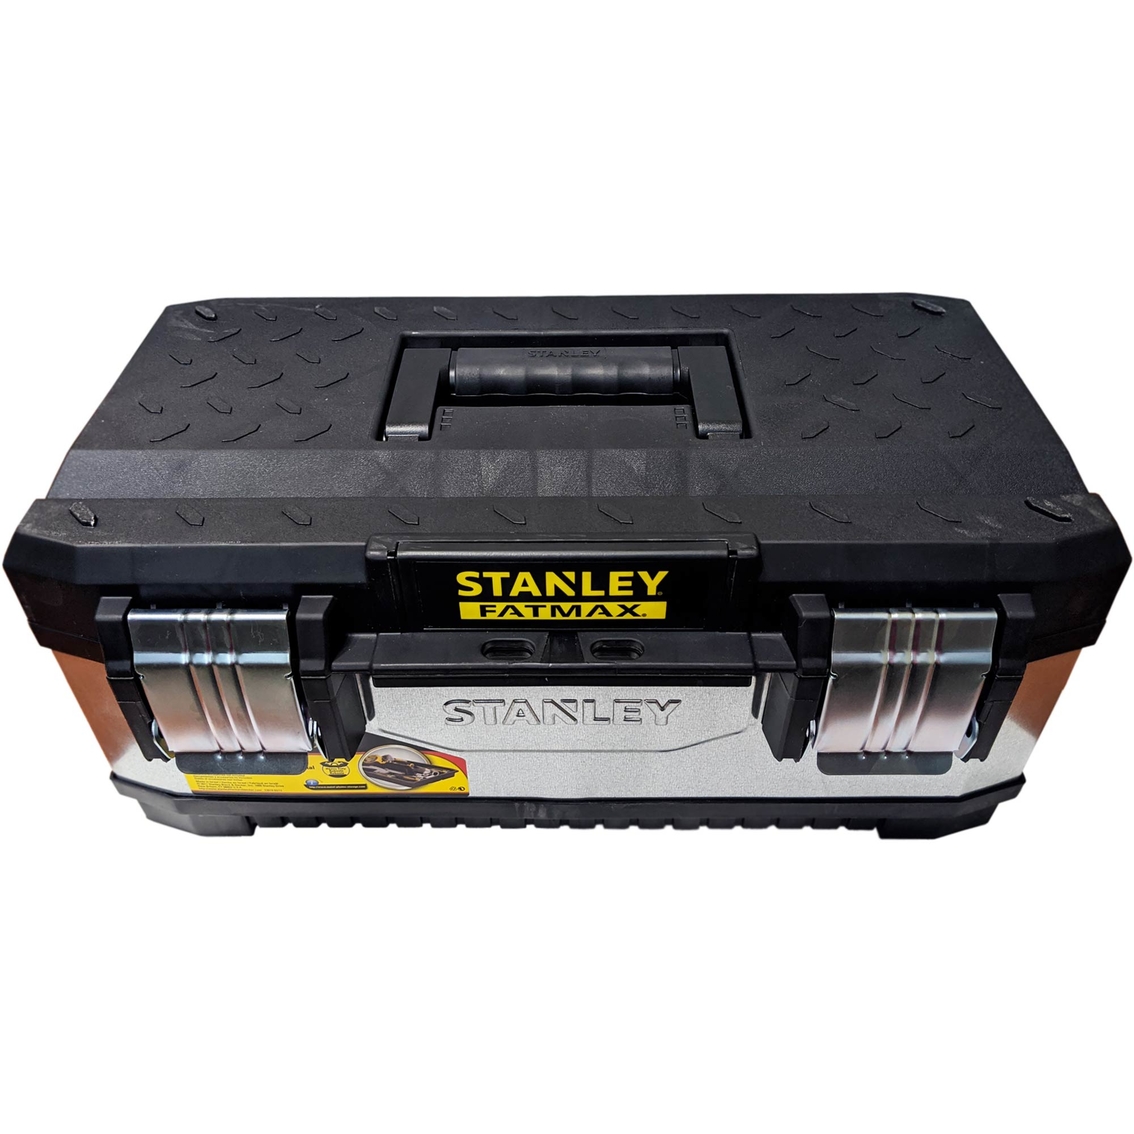 Stanley 20 in. Fatmax Metal and Plastic Toolbox - Image 2 of 4